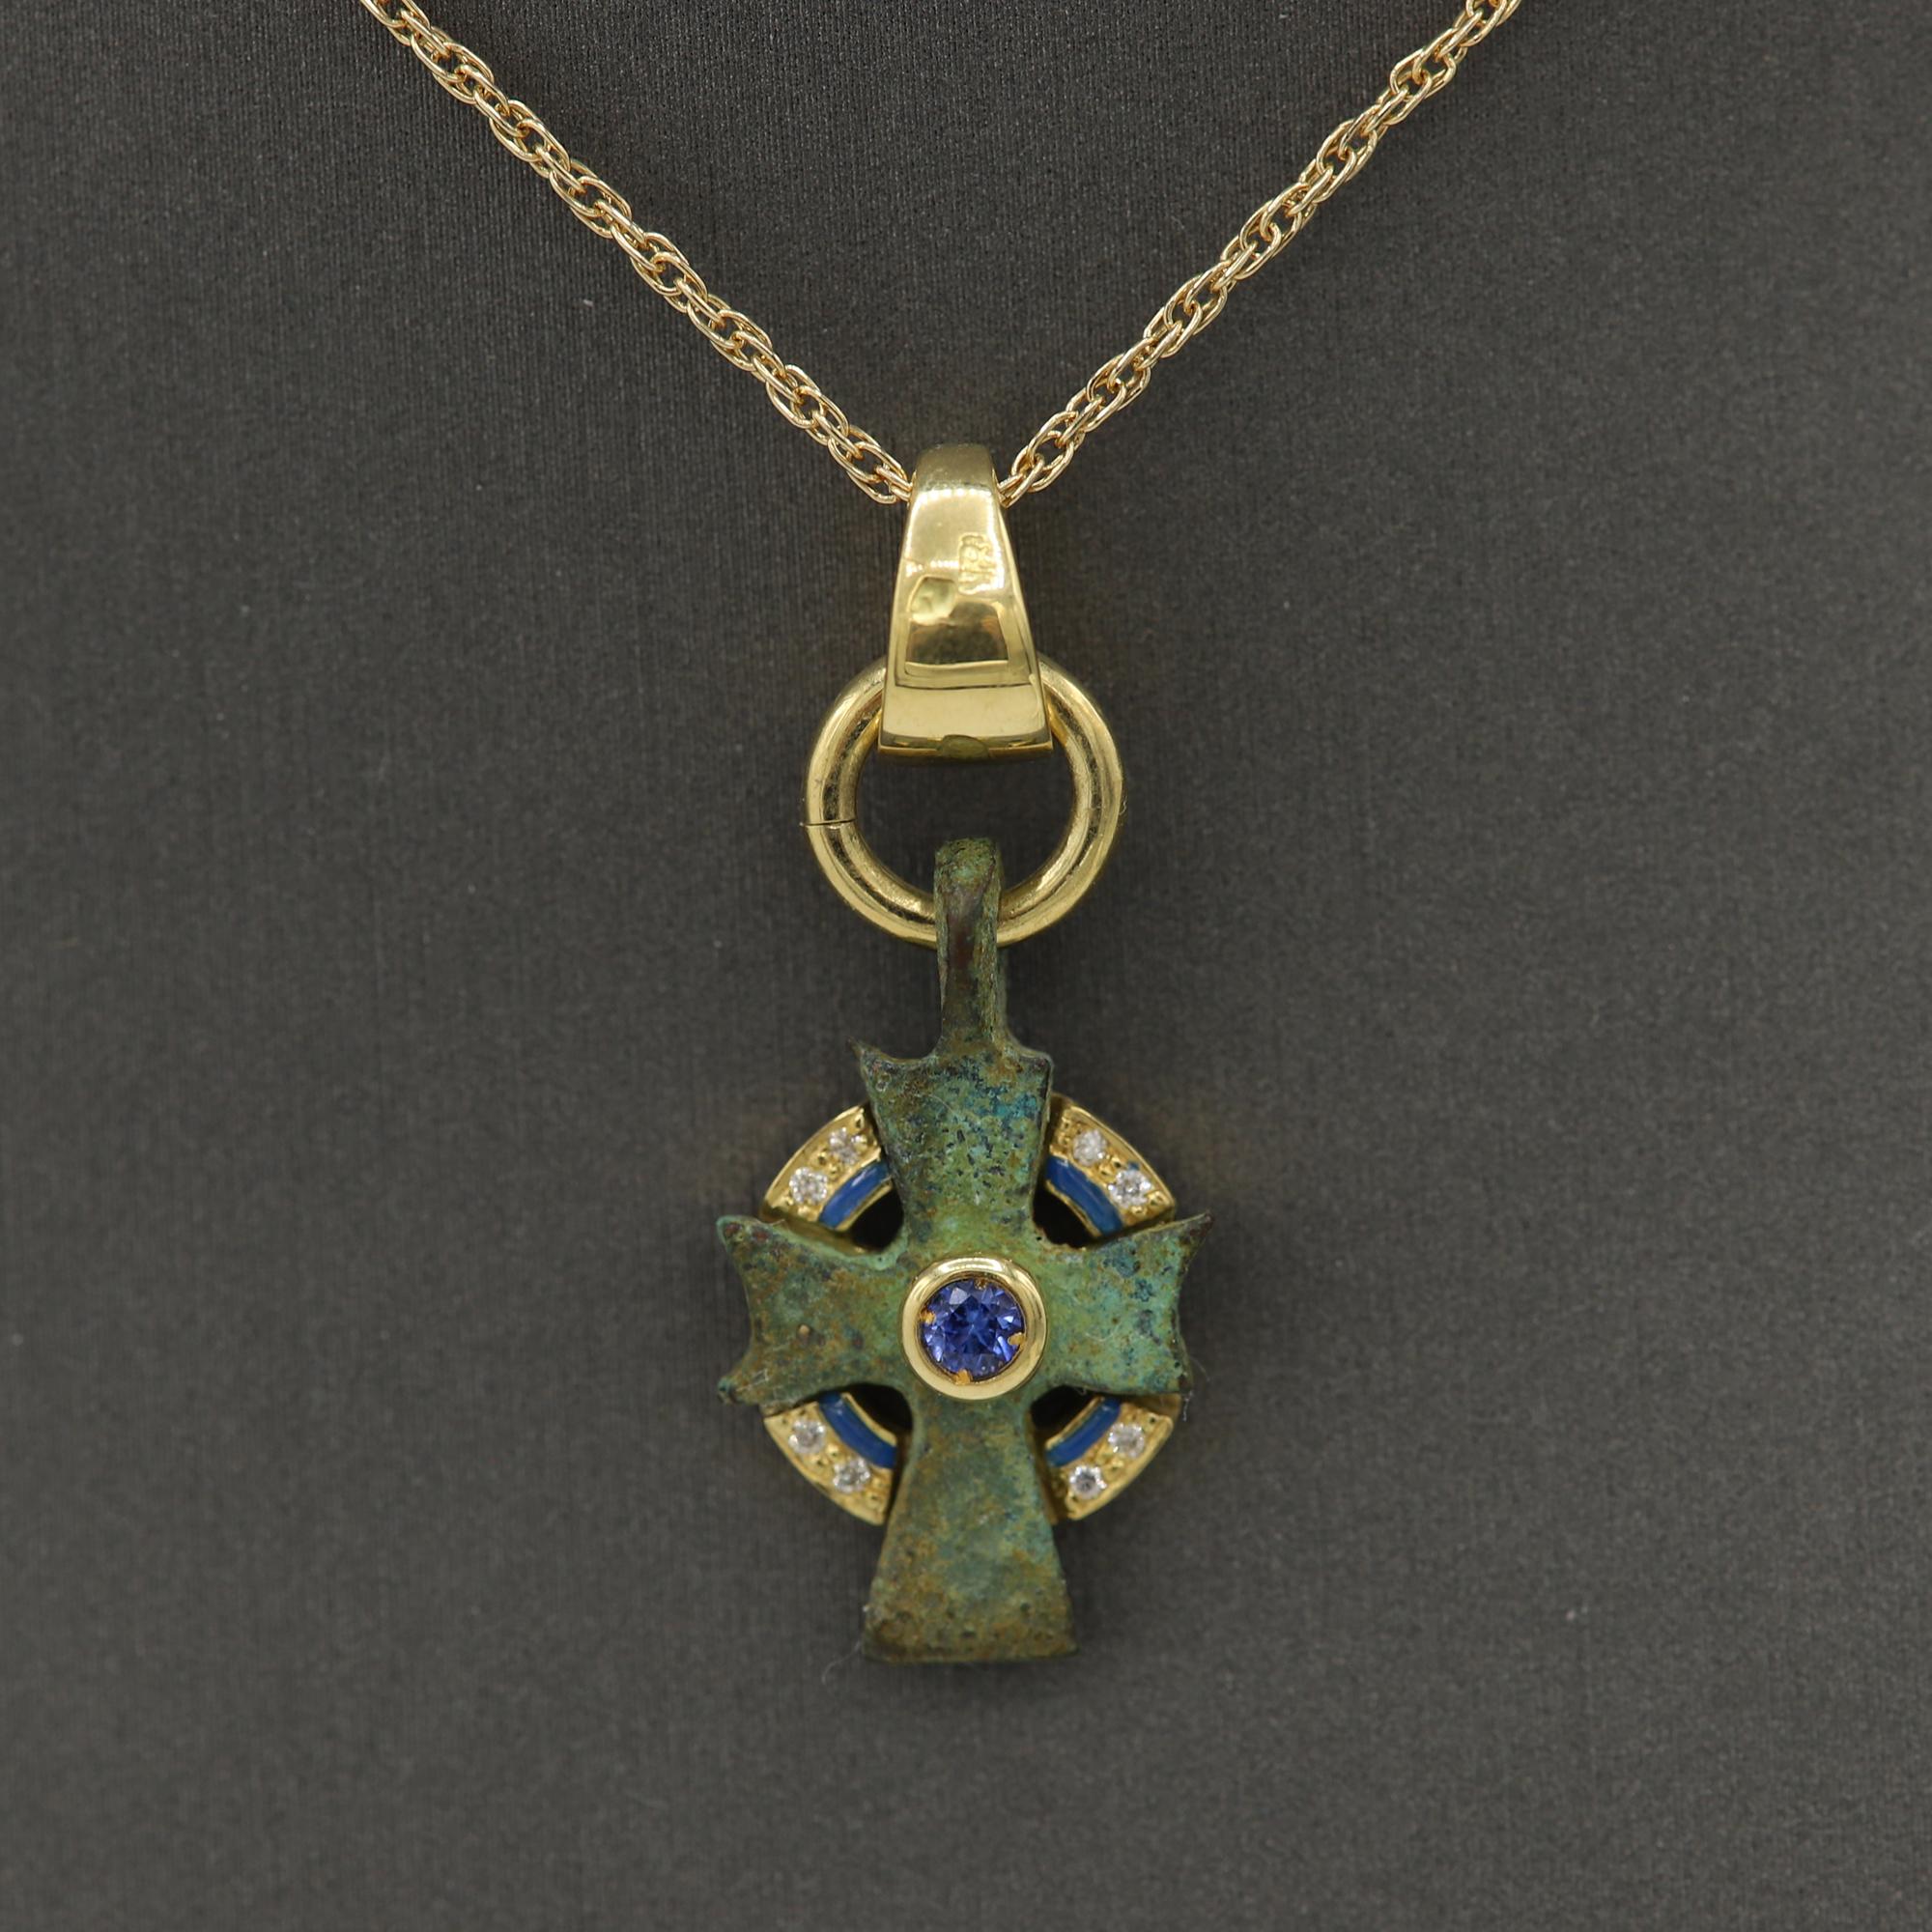 Magnificent piece of History - can be yours today !
Ancient Byzantine Period cross.
Hand set in Spain with 18k Yellow Gold.
Approx size 3/4' inch or 20 mm.
With a center Blue Sapphire and a little bit enamel.
some Diamonds too.
this Antique Bronze